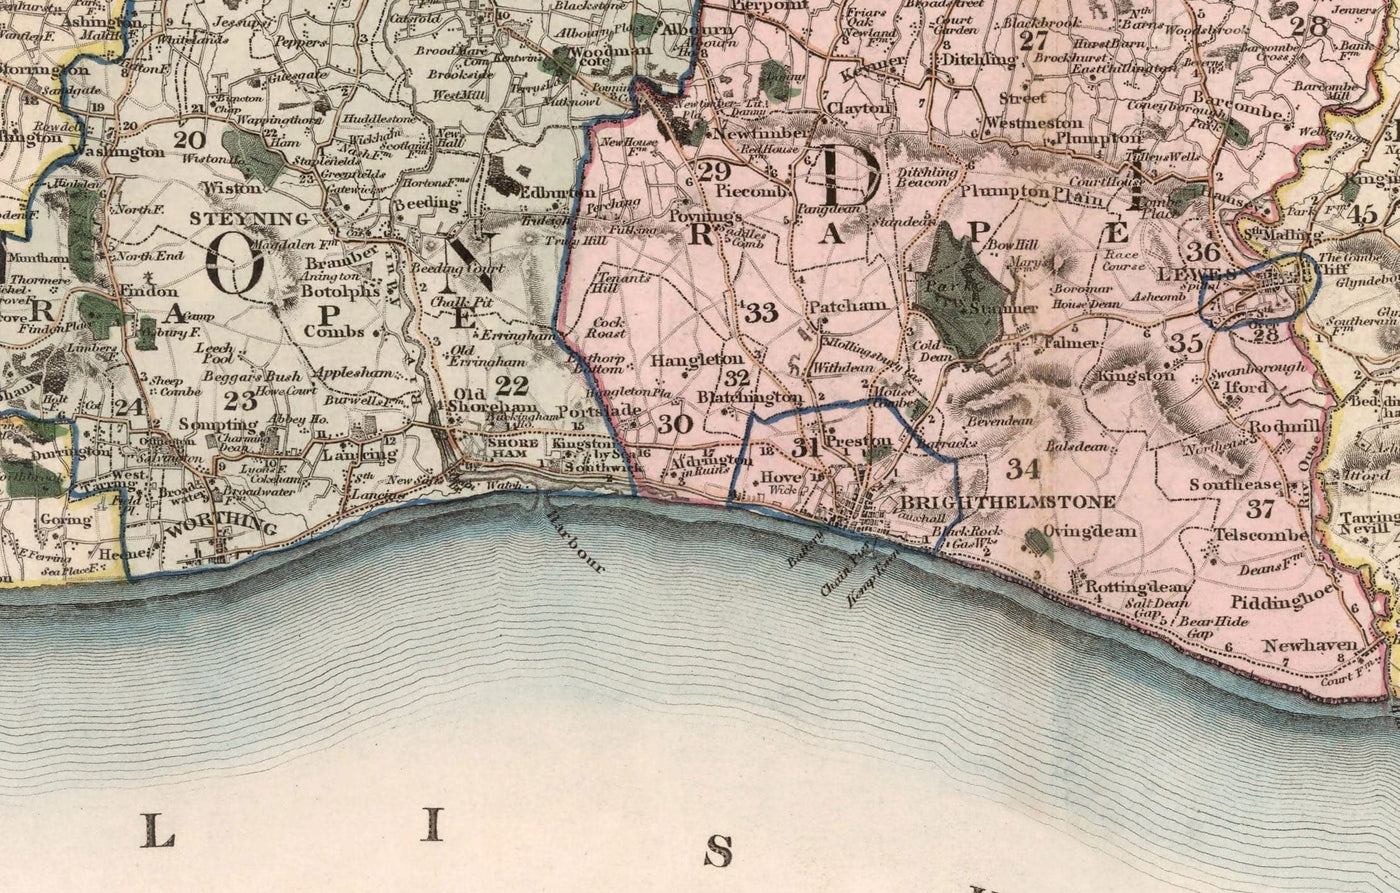 Old Map of Sussex 1829 by Greenwood & Co. - Worthing, Crawley, Brighton, Bognor, Eastbourne